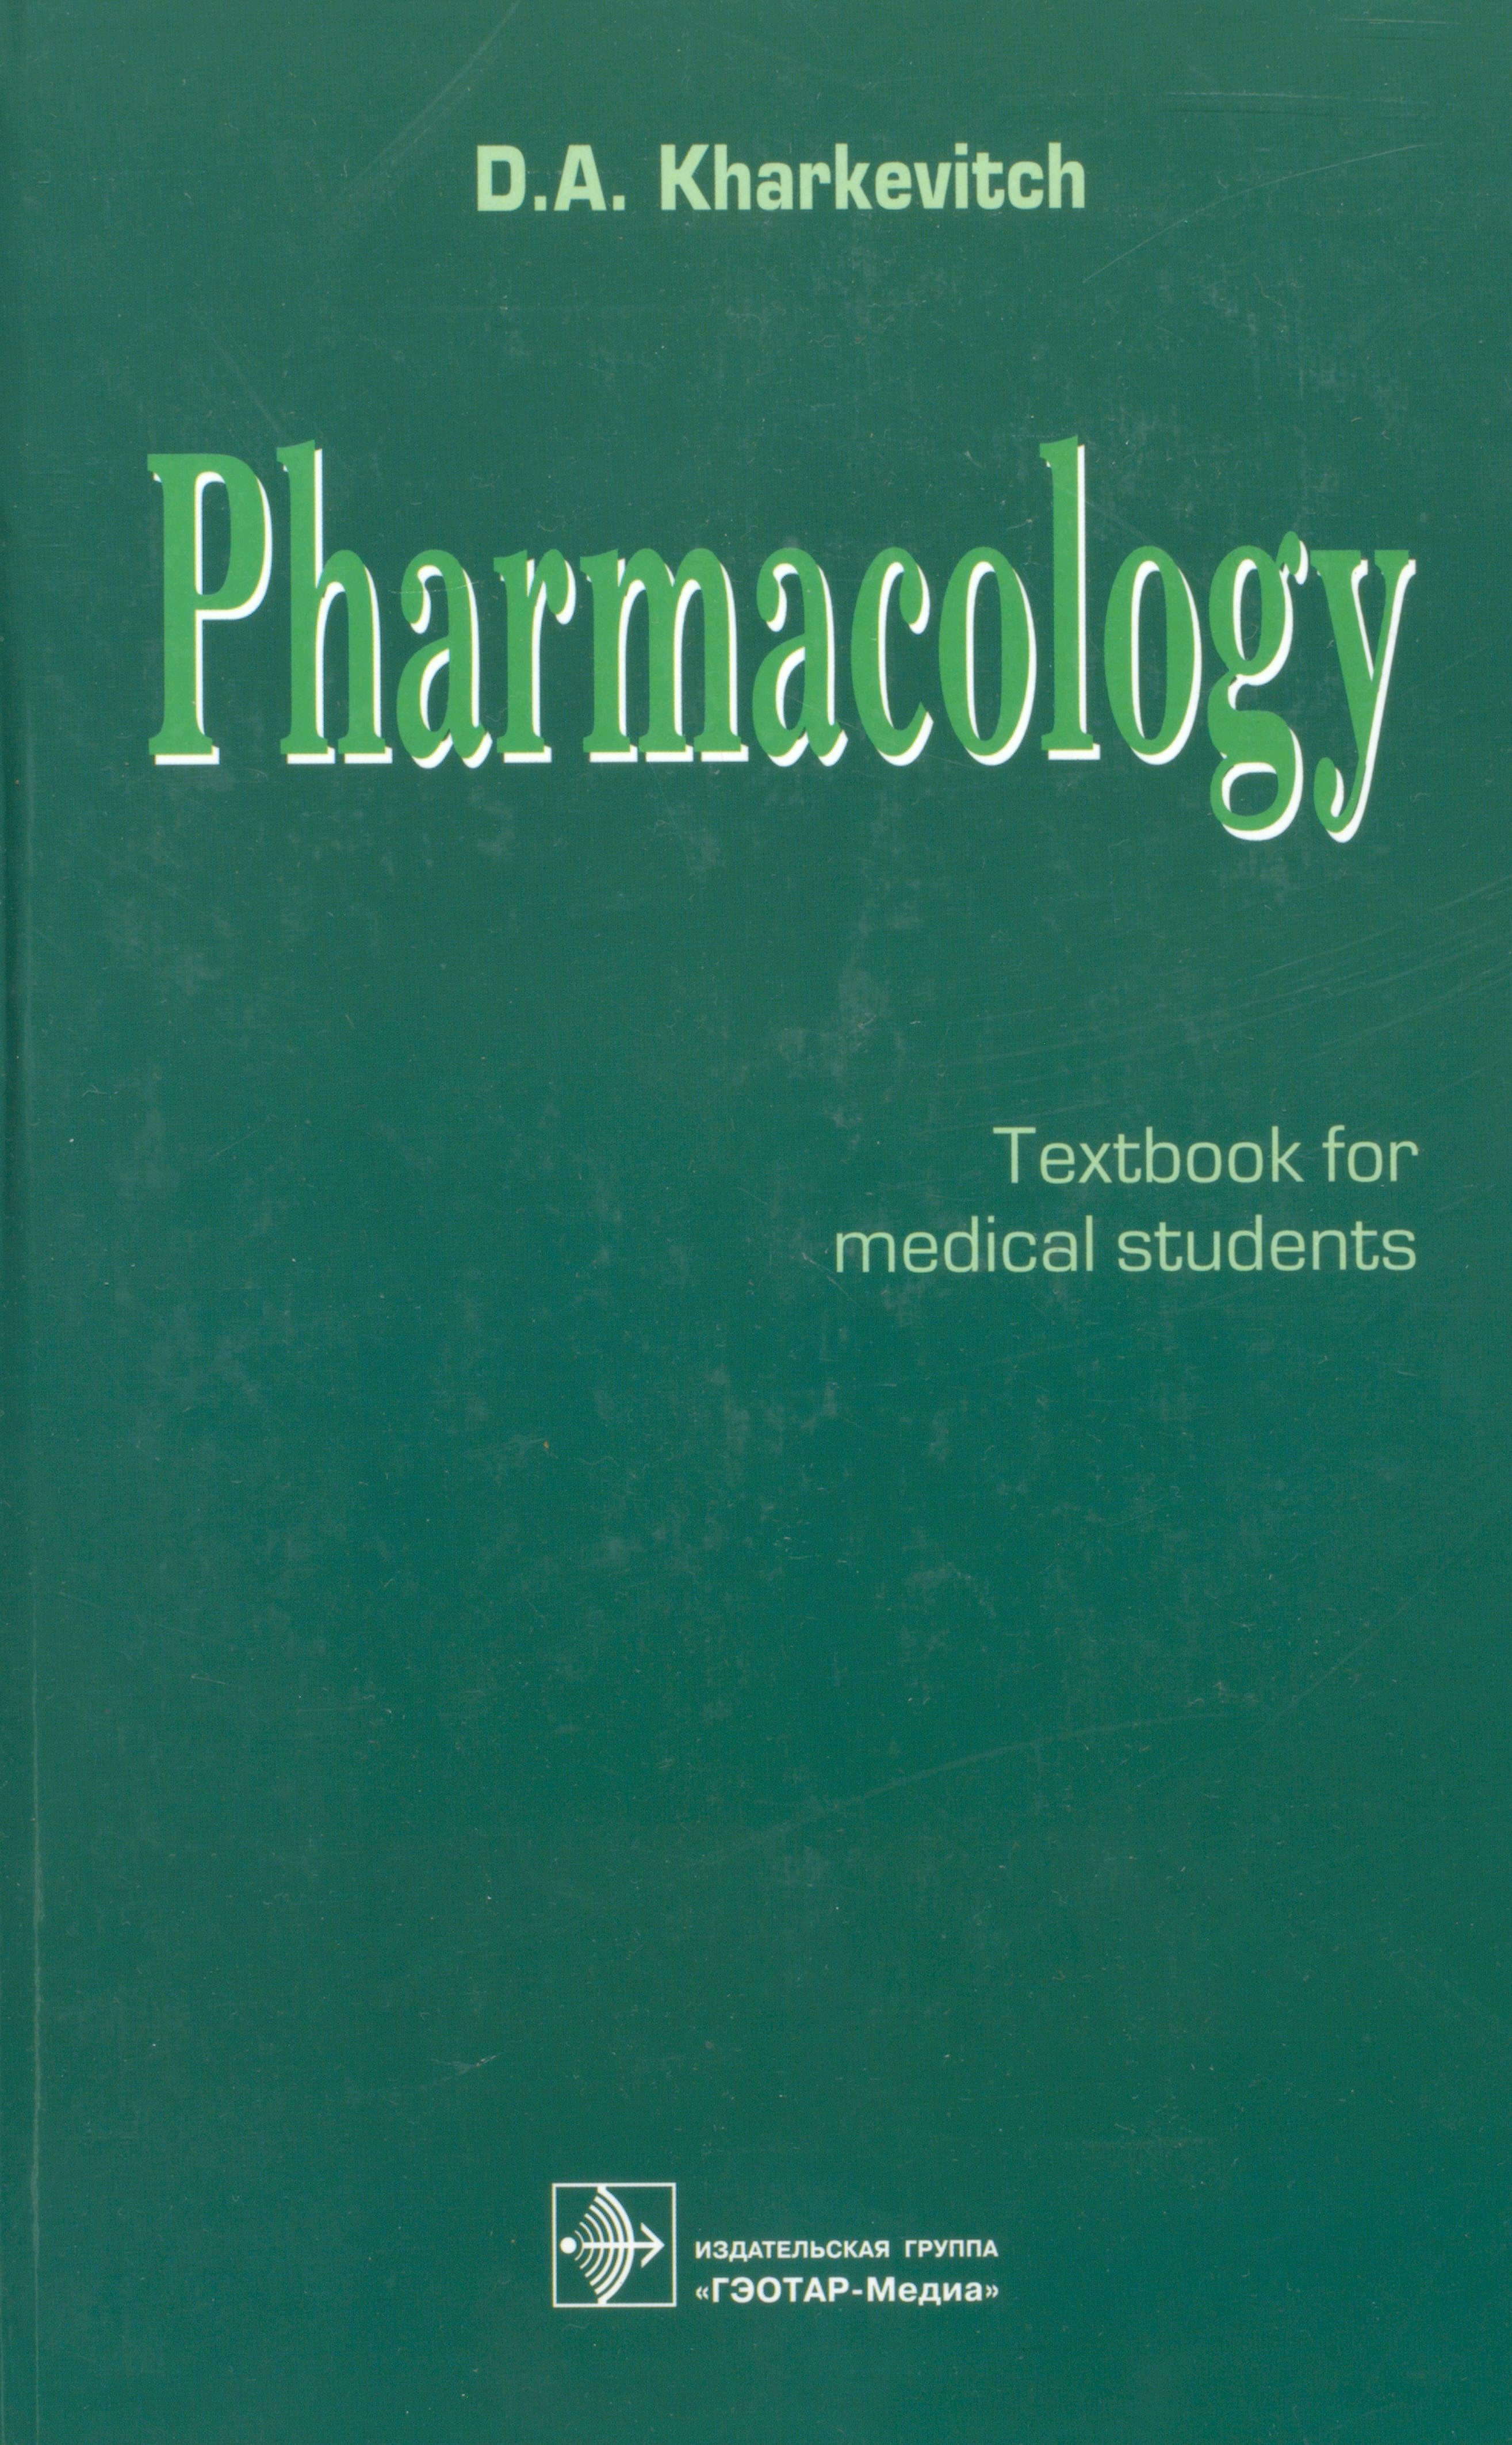 Pharmacology. Textbook for medical students. 9A edition, revised and improved\r\n Pharmacology. Textbook for medical students. 9A edition, revised and improved\r\n Pharmacology. Textbook for medical students. 9A edition, revised and improved (на англ